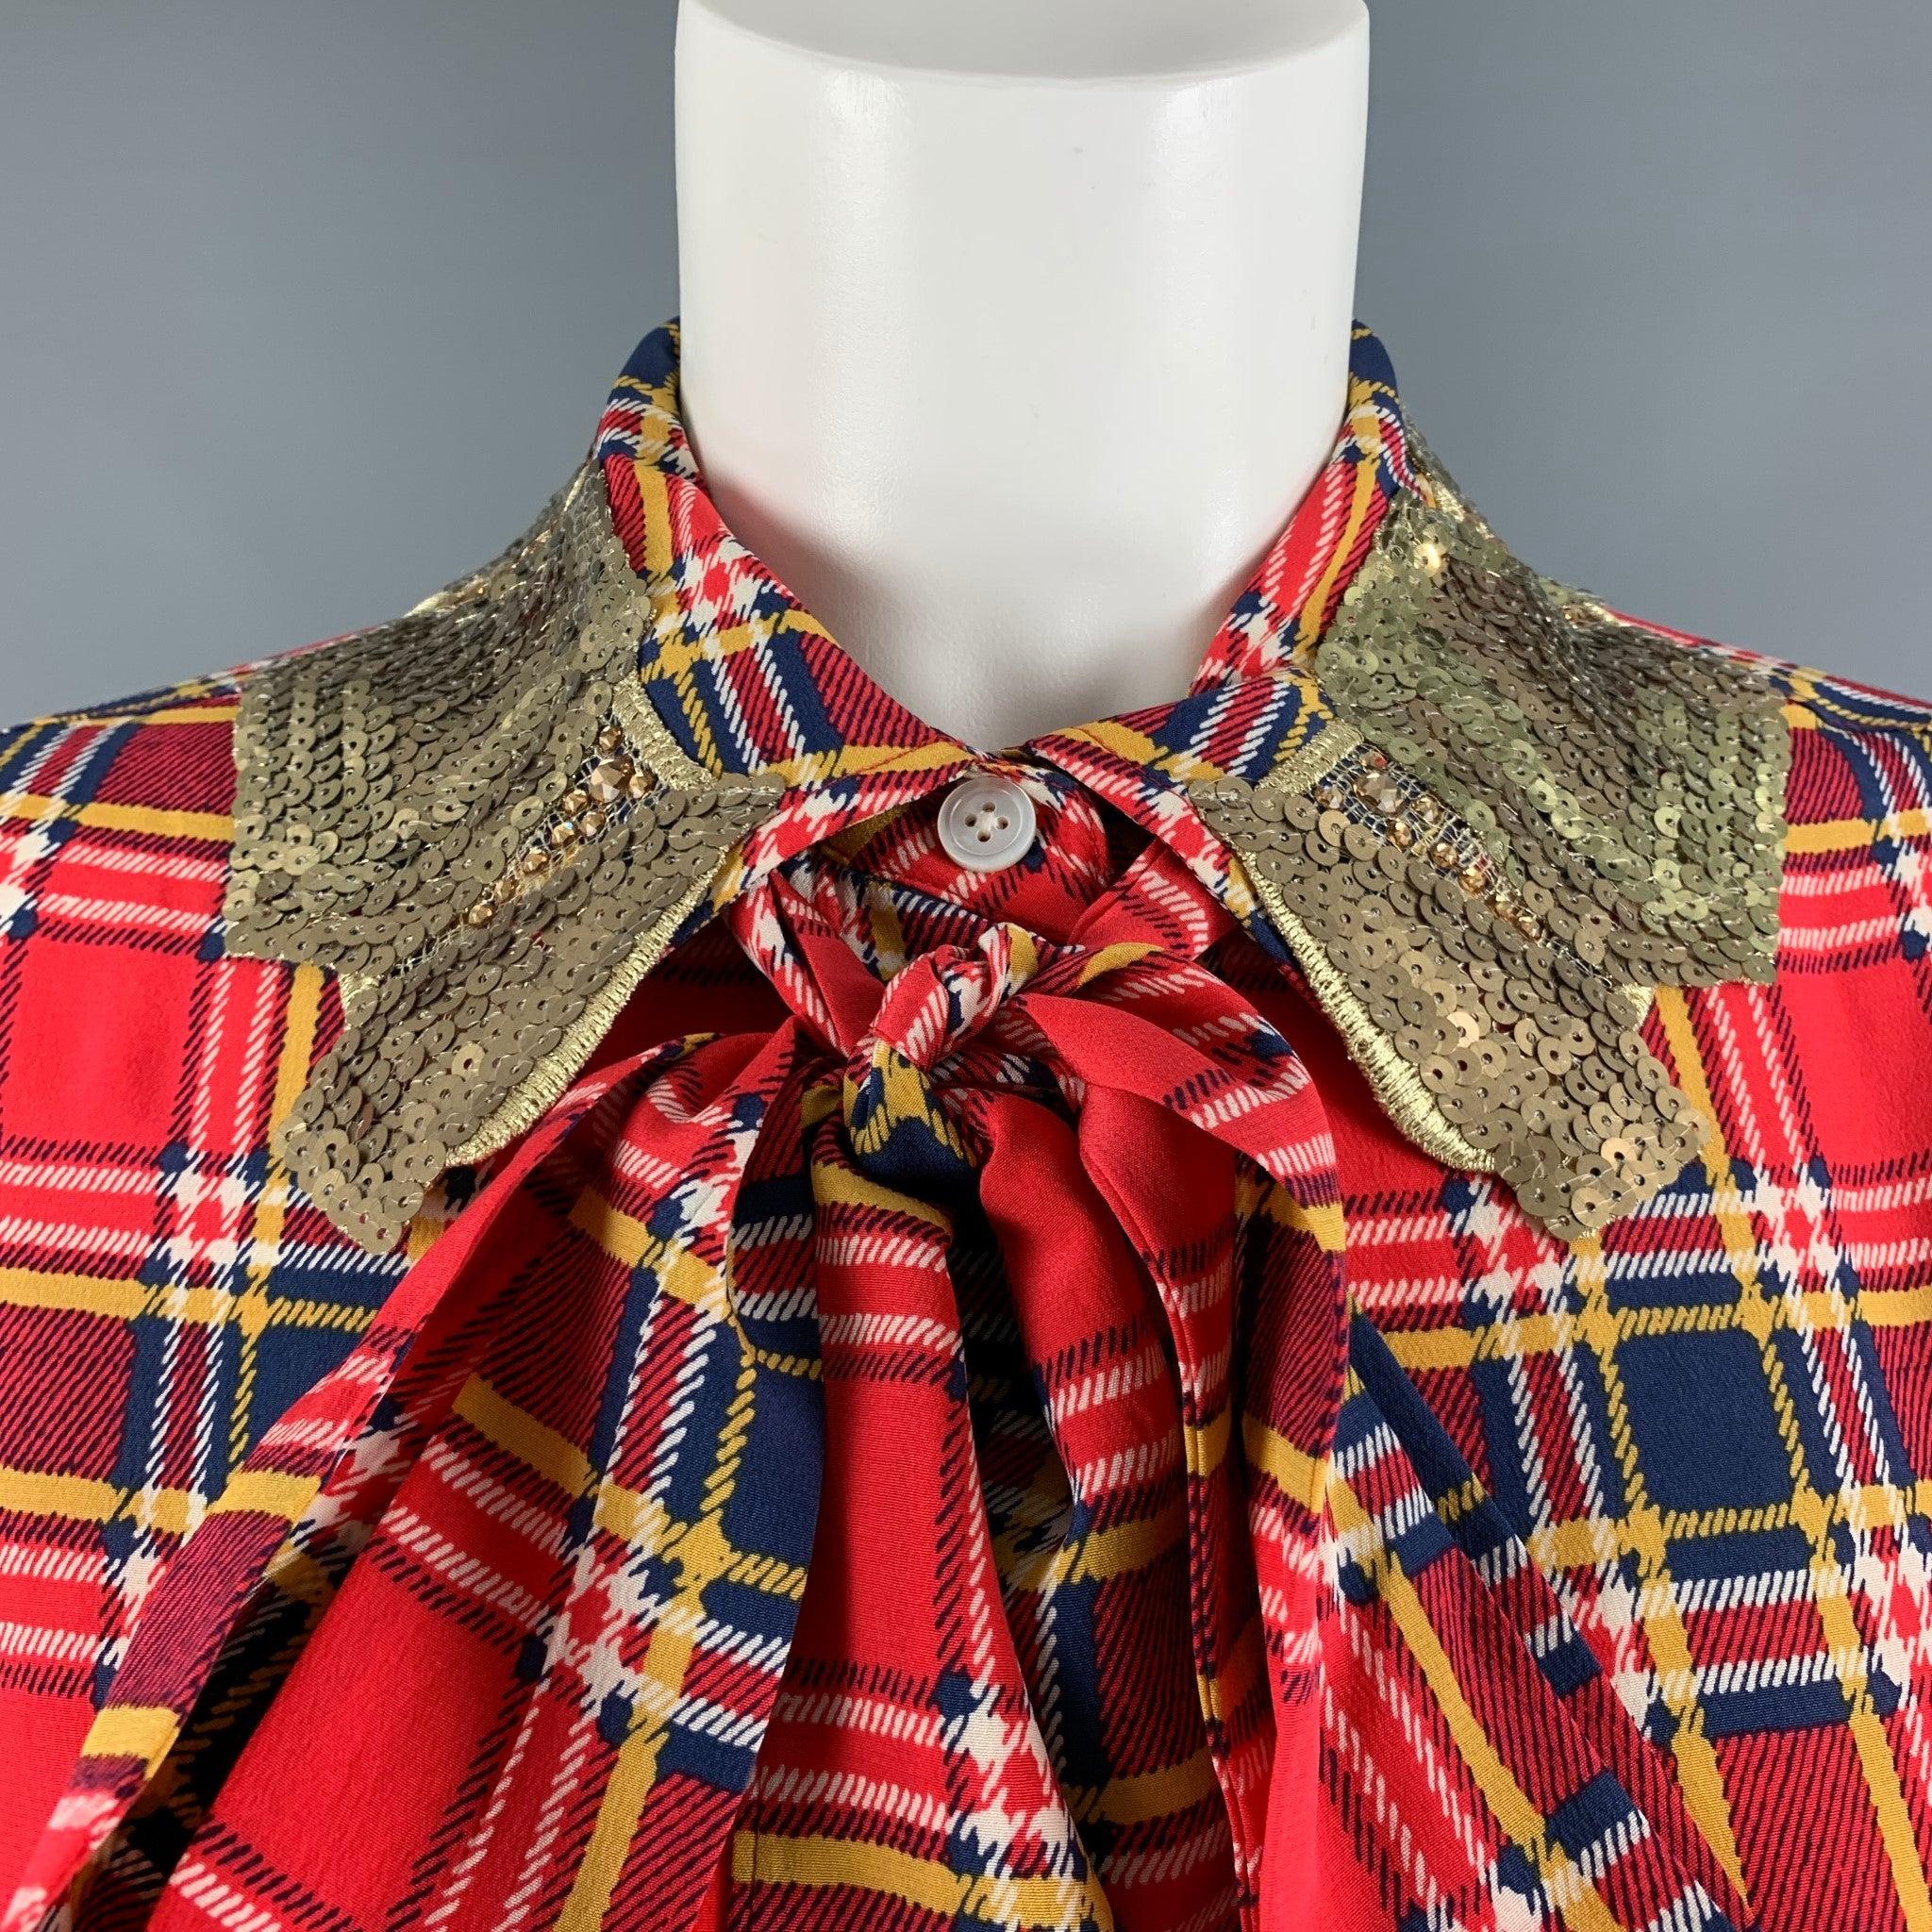 MARC JACOBS long shirt comes in a red & blue plaid silk featuring a loose fit, front bow design, sequined collar, and a buttoned closure. Excellent Pre-Owned Condition. 

Marked:   8 

Measurements: 
 
Shoulder: 18.5 inches Bust: 49 inches Sleeve: